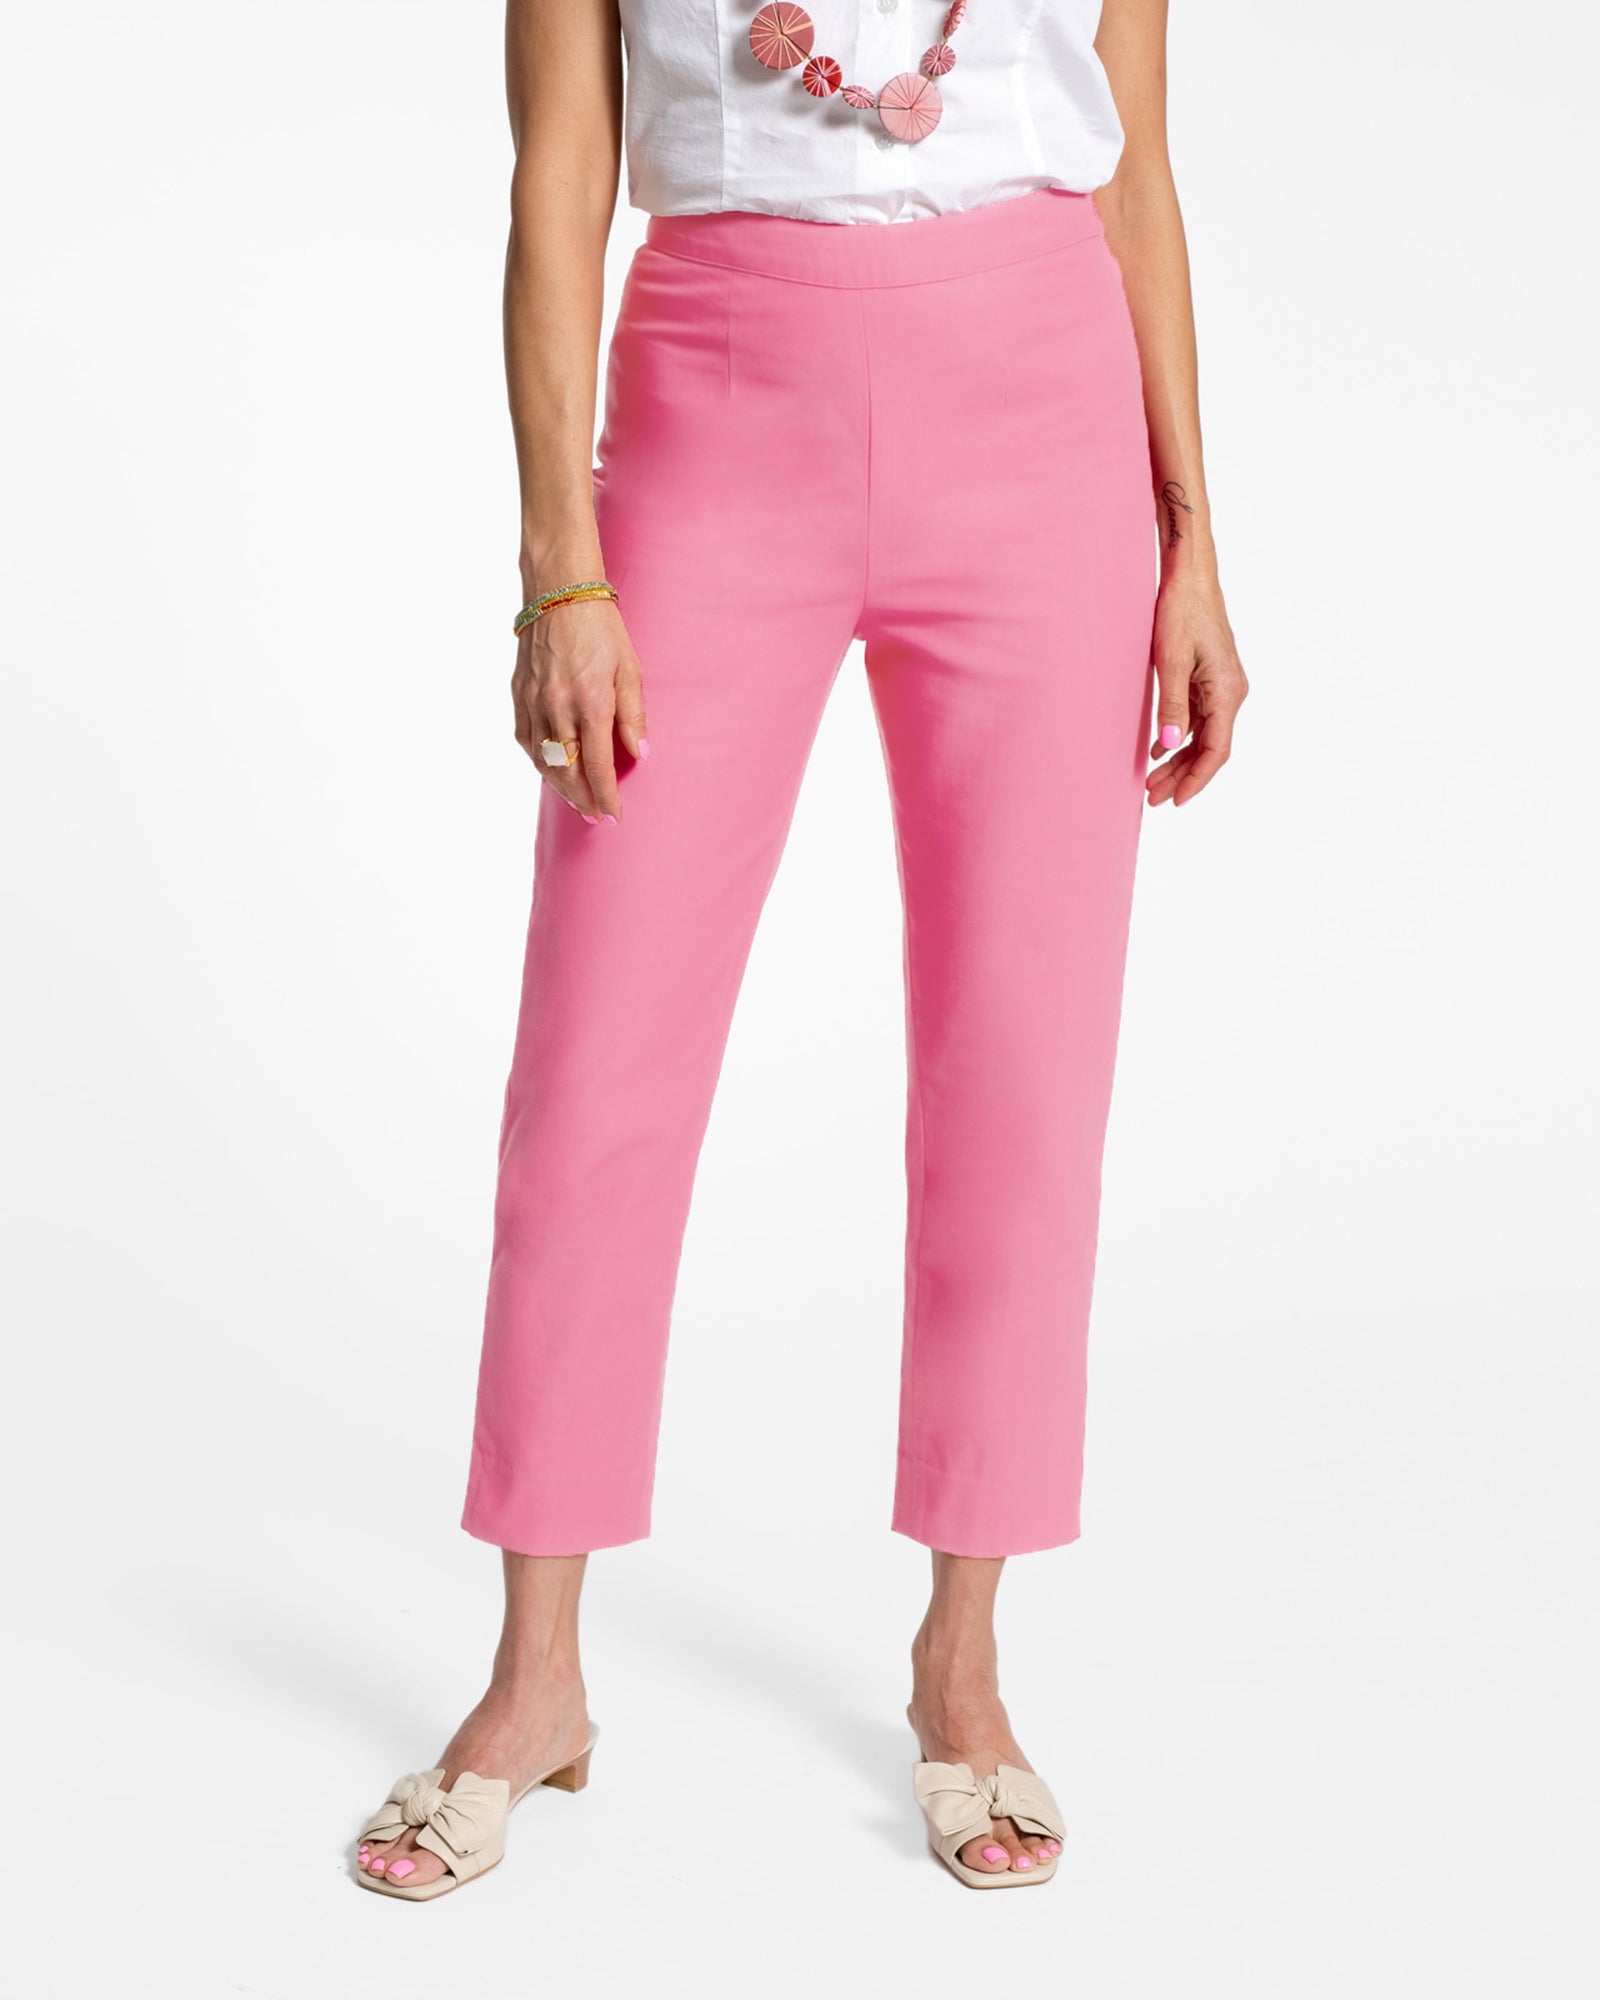 Lucy Pant Solid Cotton Stretch FV Pink